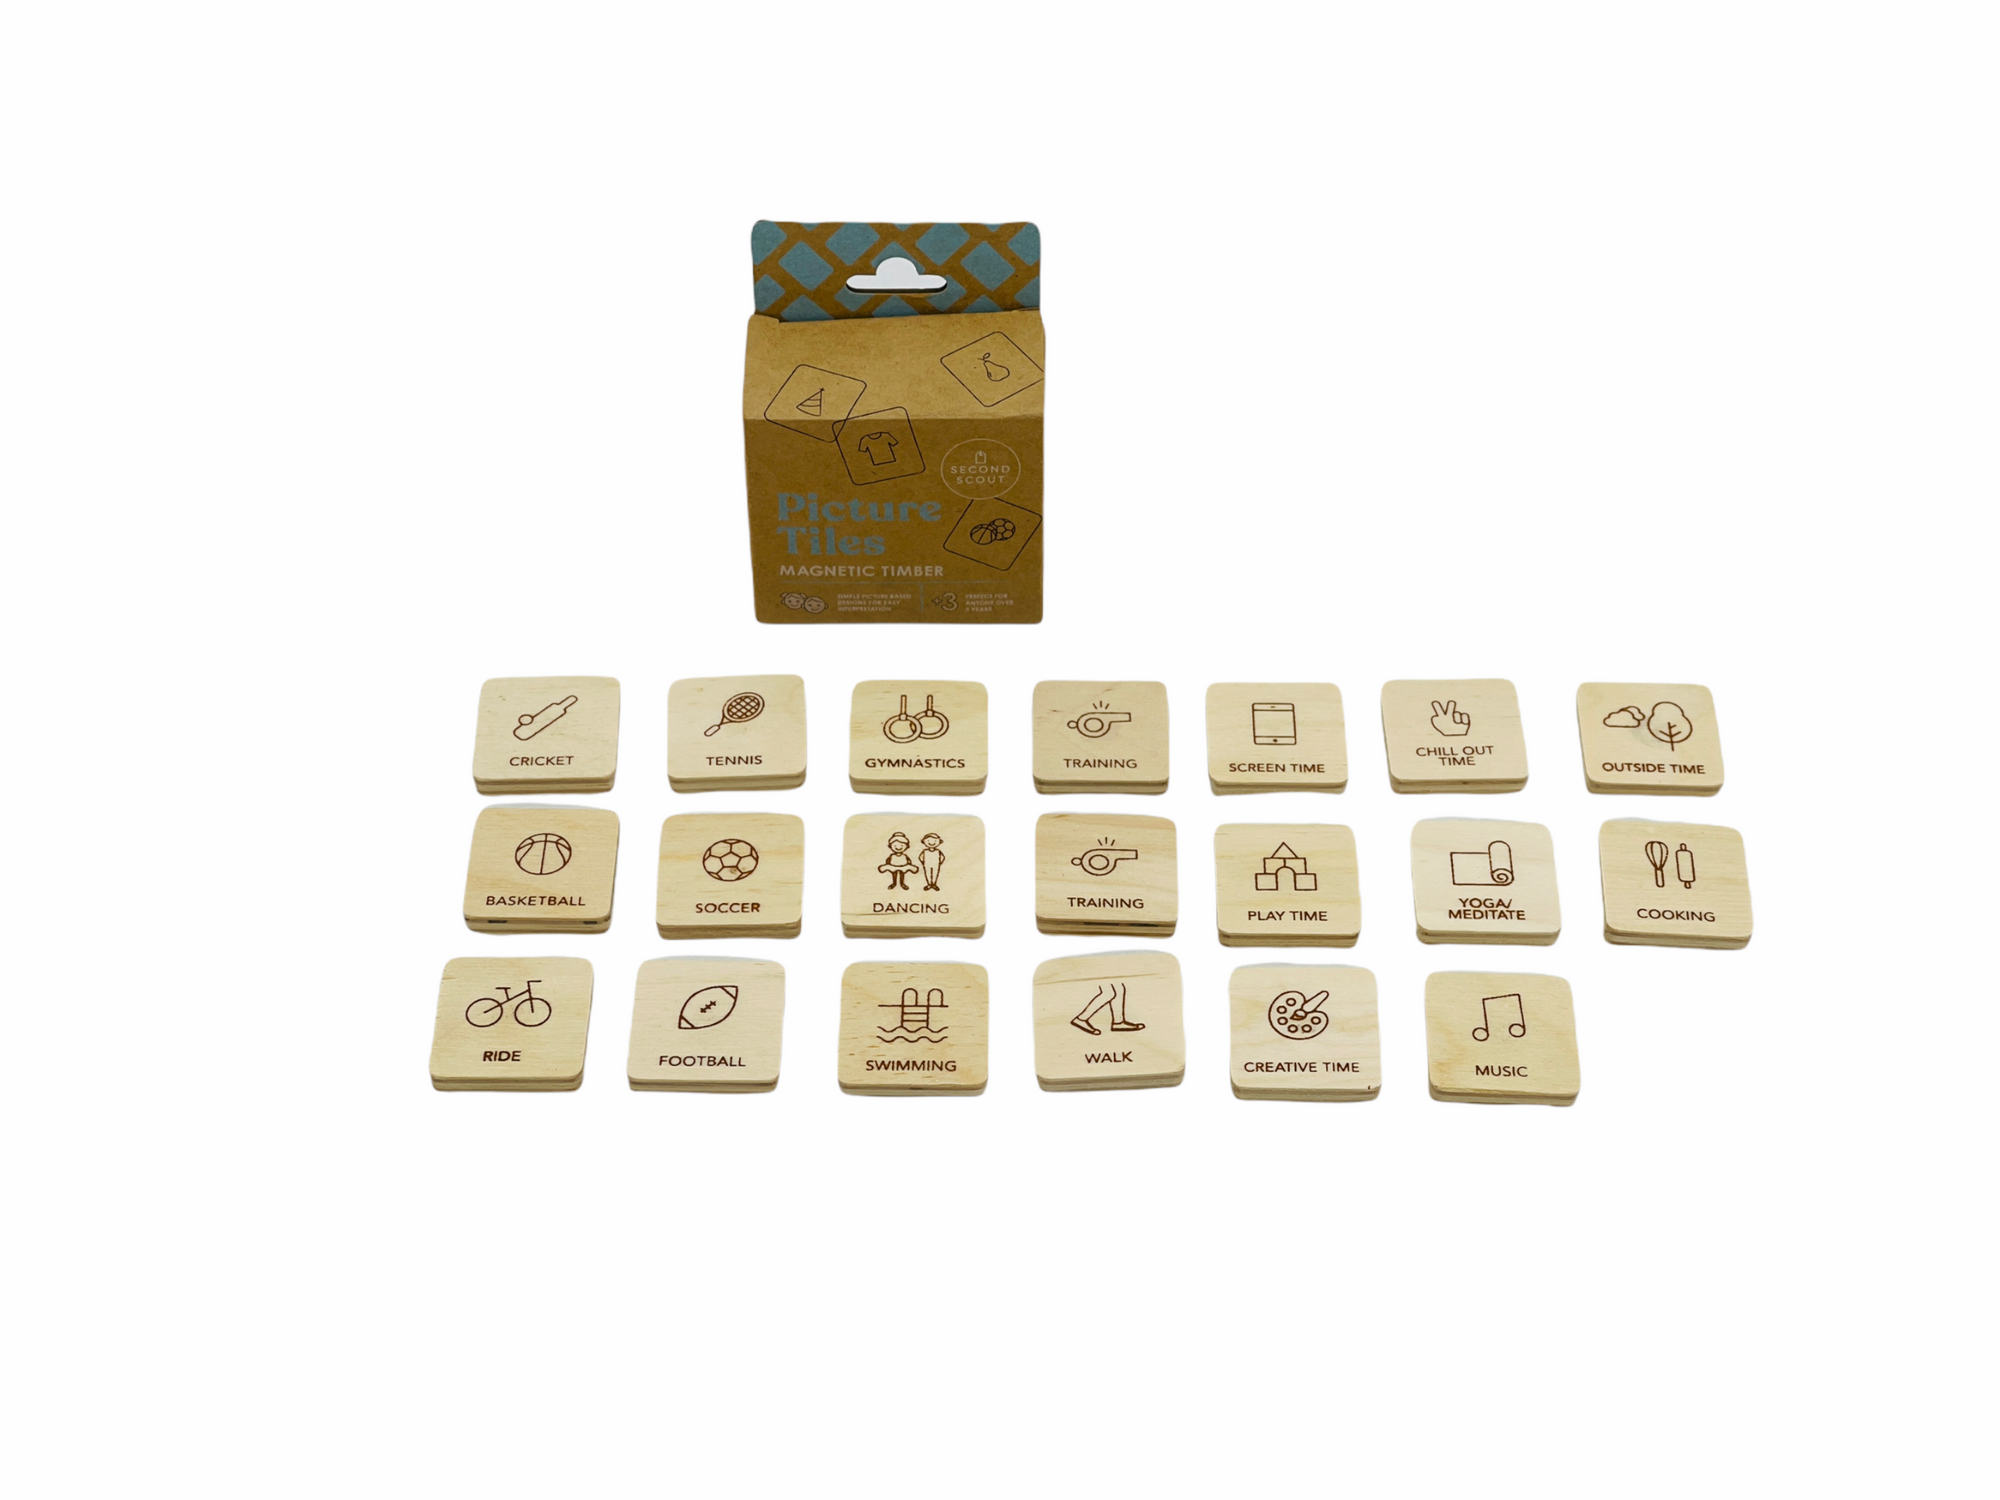 Second Scout Picture Tiles - Activities with wooden tiles laid out in front of packaging box on white background